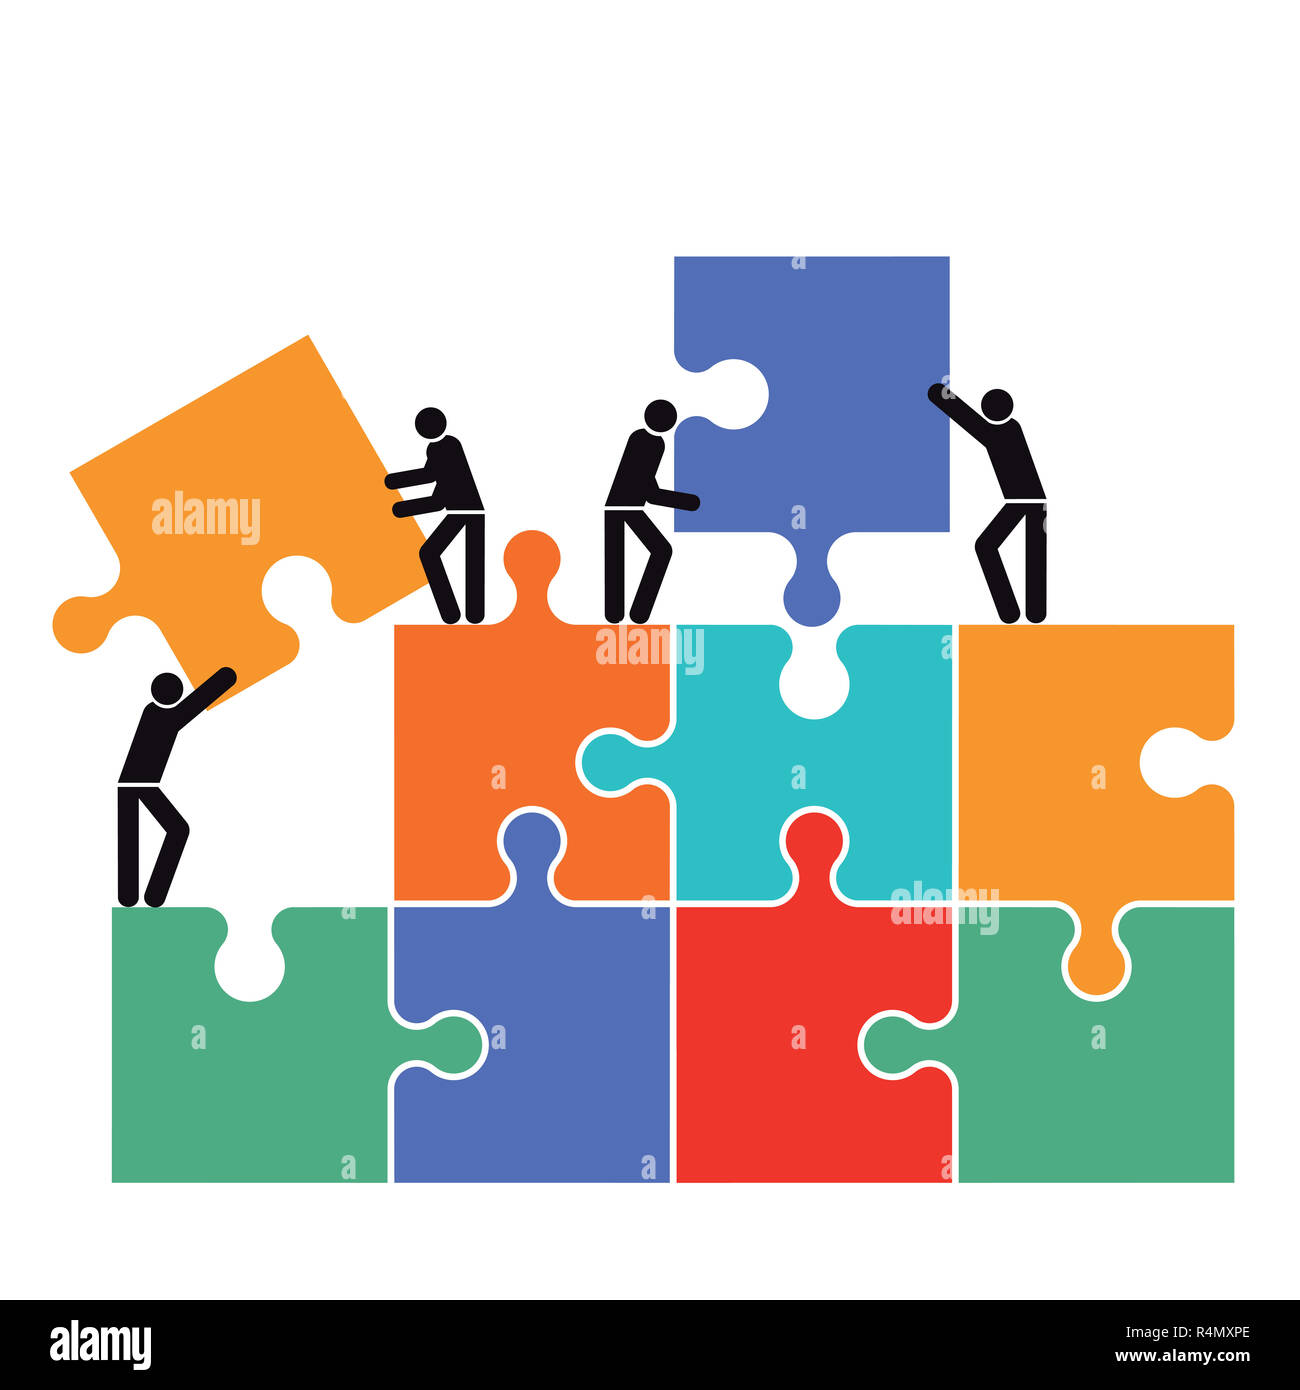 collaboration in the group icon illustration Stock Photo